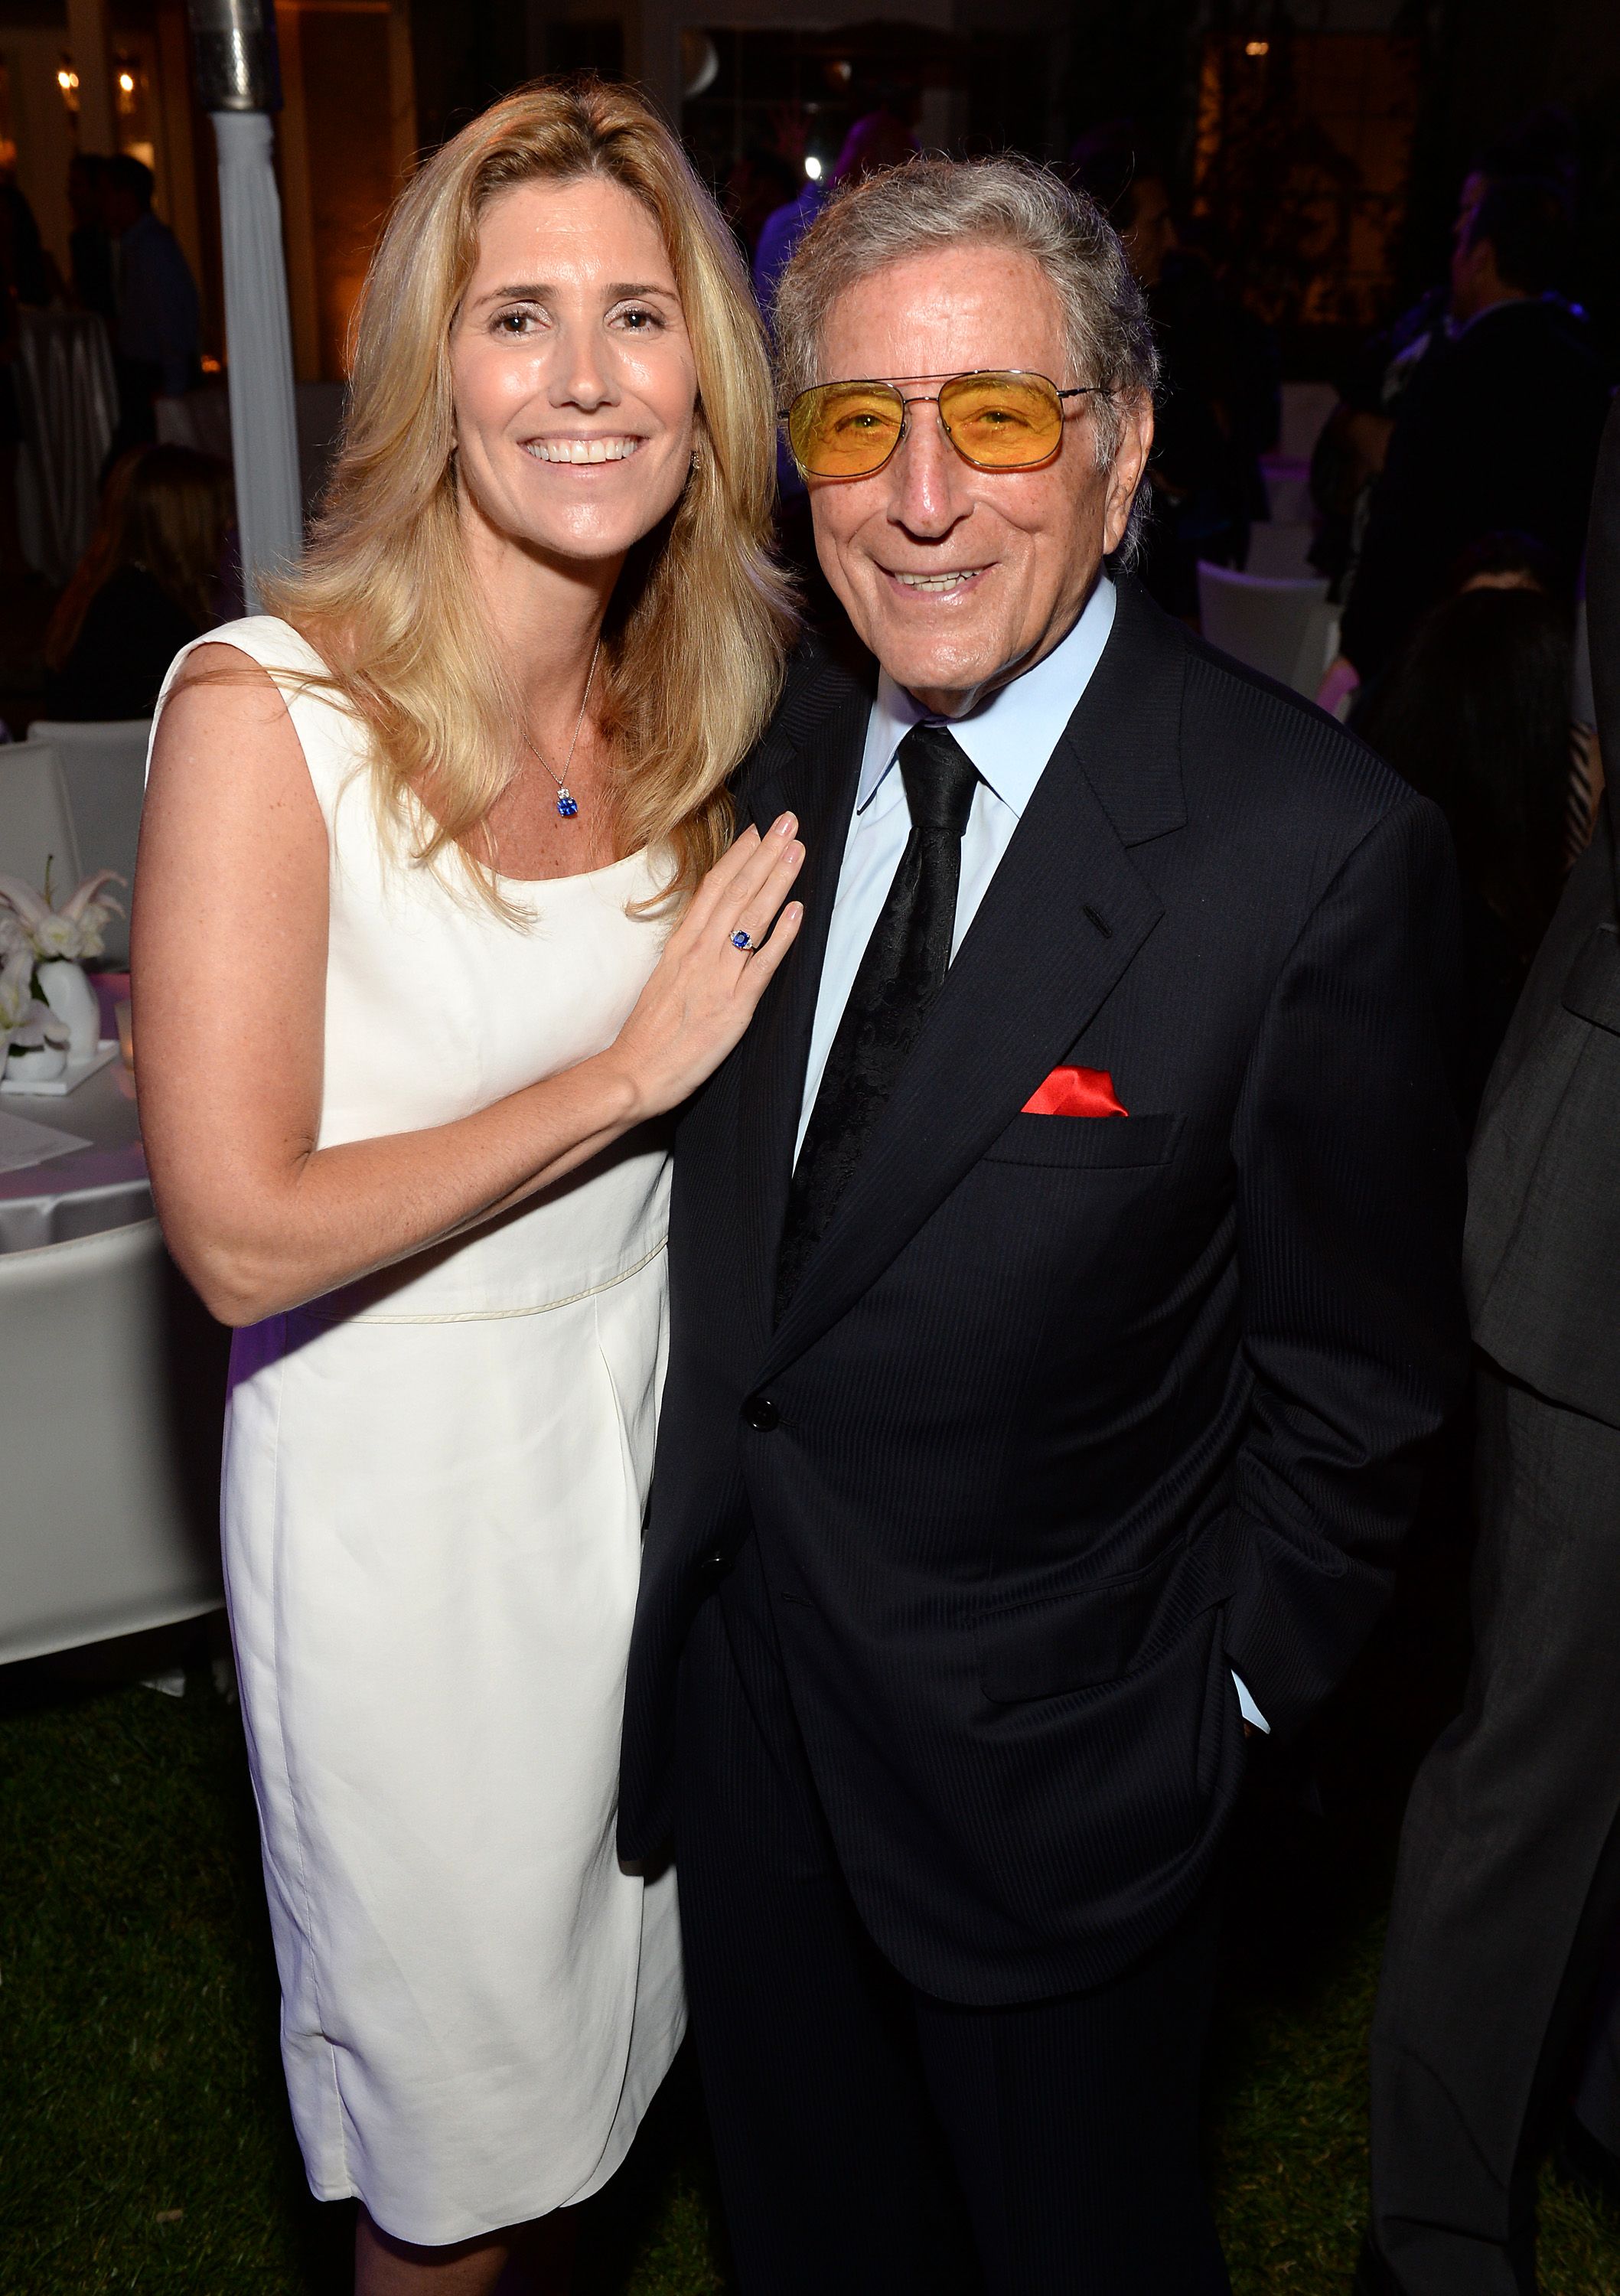 Tony Bennett and wife Susan Benedetto attend his 87th birthday celebration in 2013 in Beverly Hills | Source: Getty Images